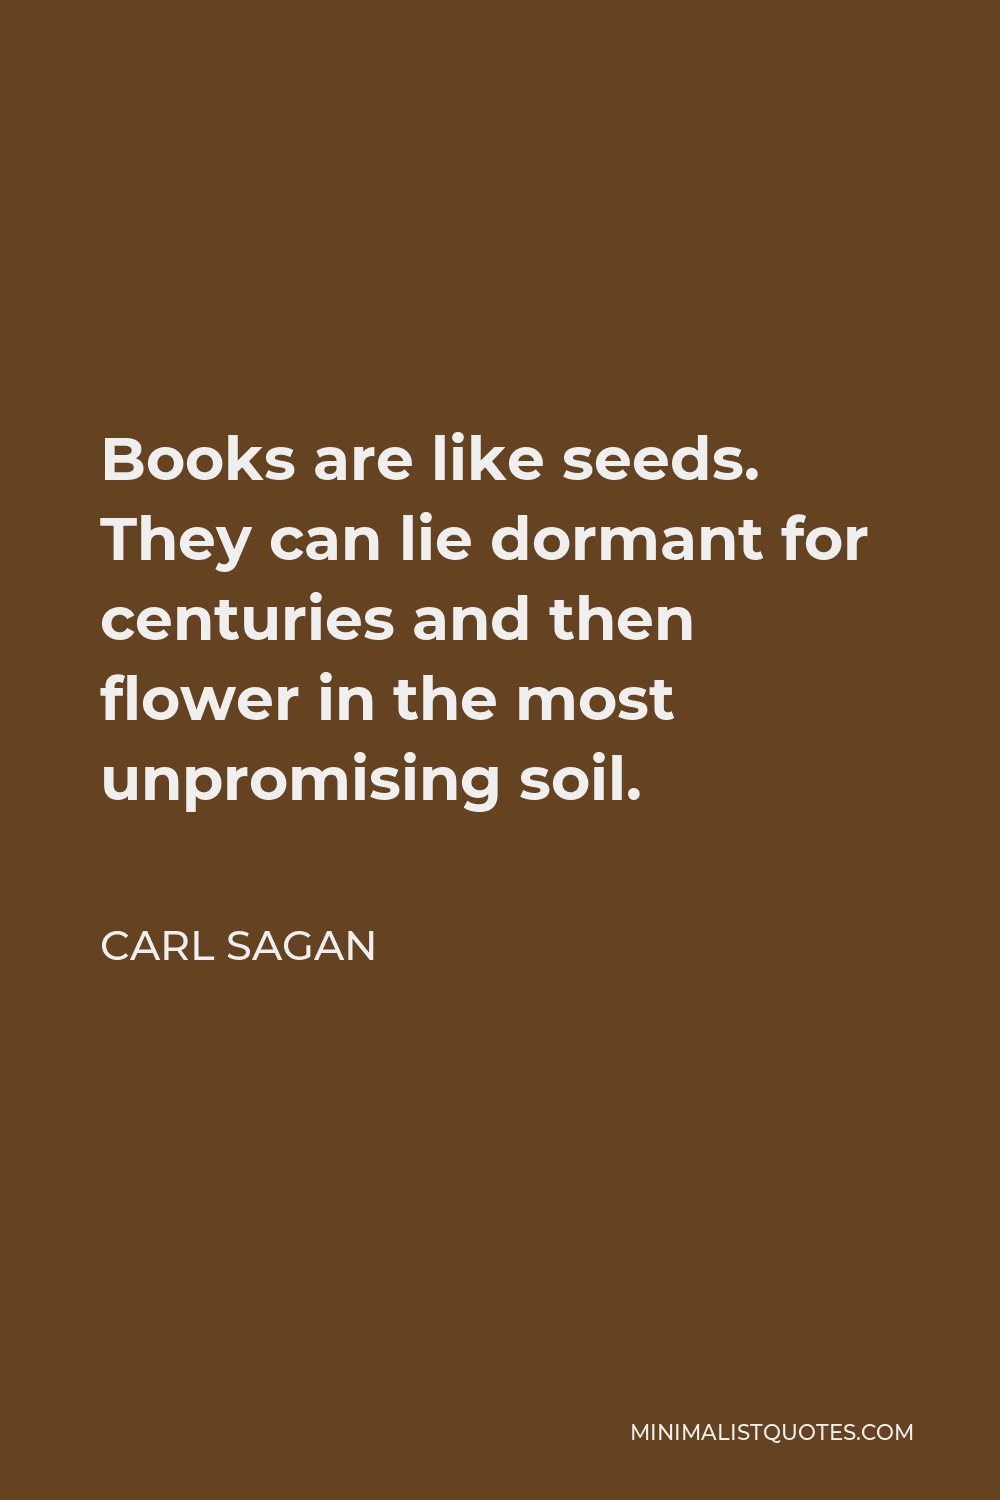 Carl Sagan Quote - Books are like seeds. They can lie dormant for centuries and then flower in the most unpromising soil.